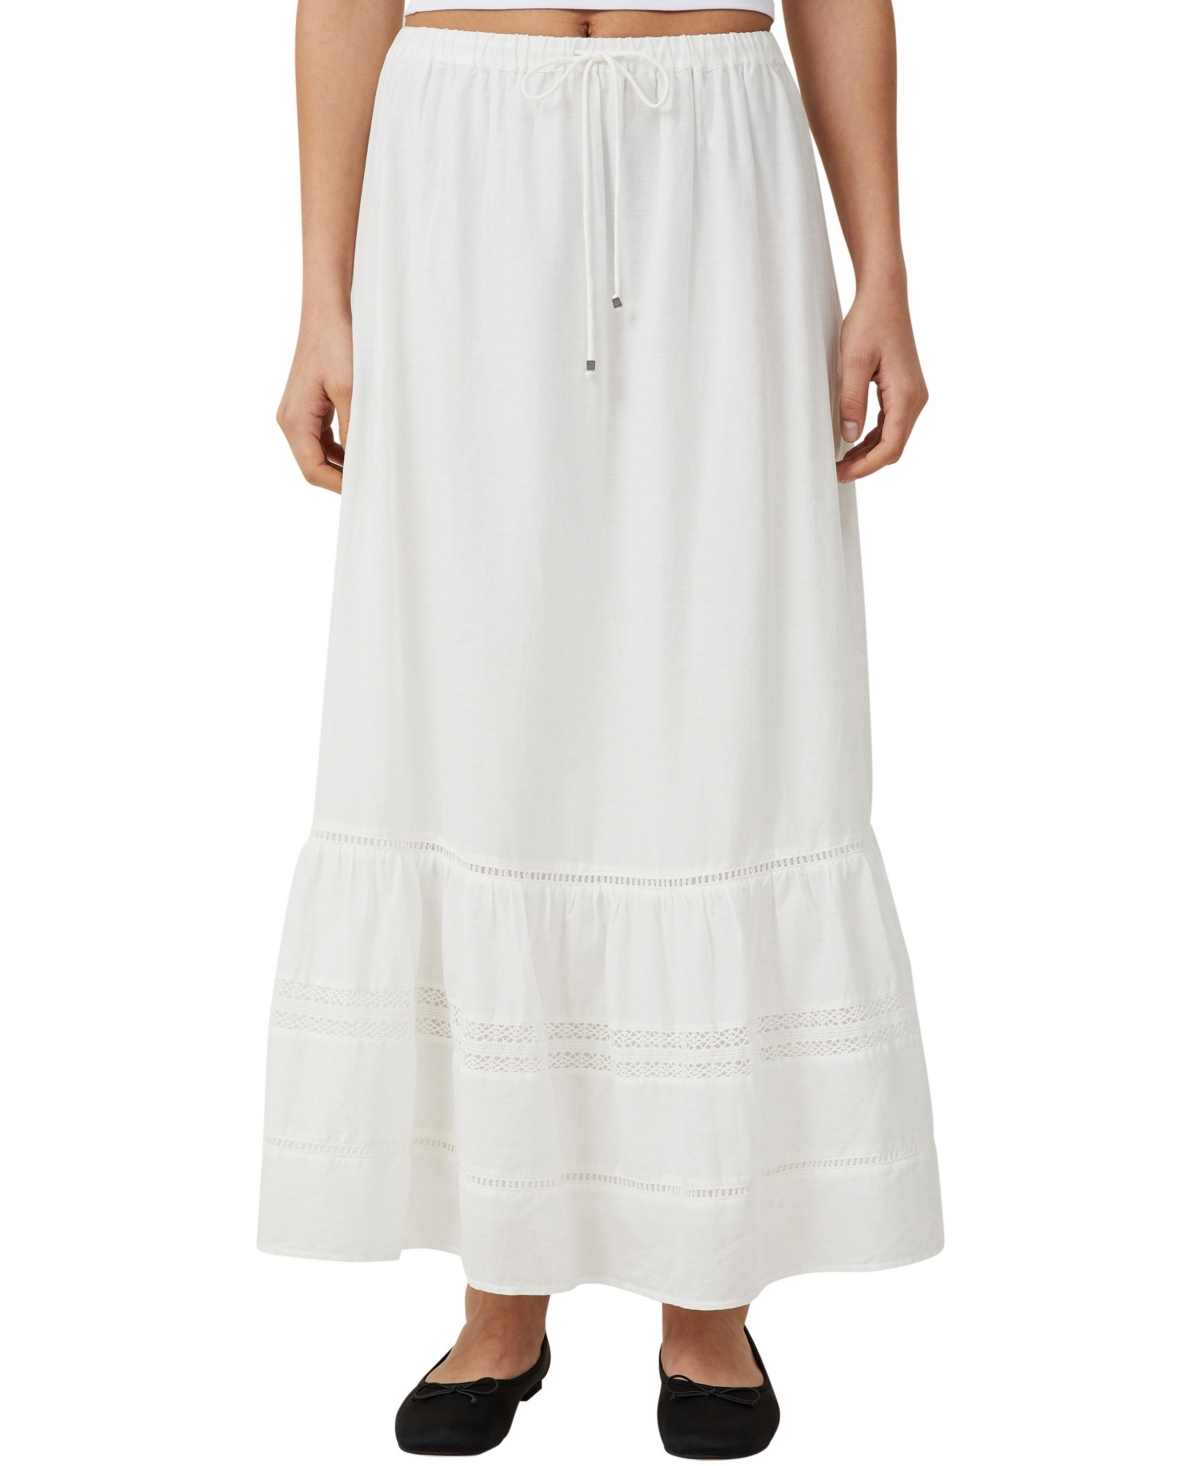 Cotton On Women's Rylee Lace Maxi Skirt In White